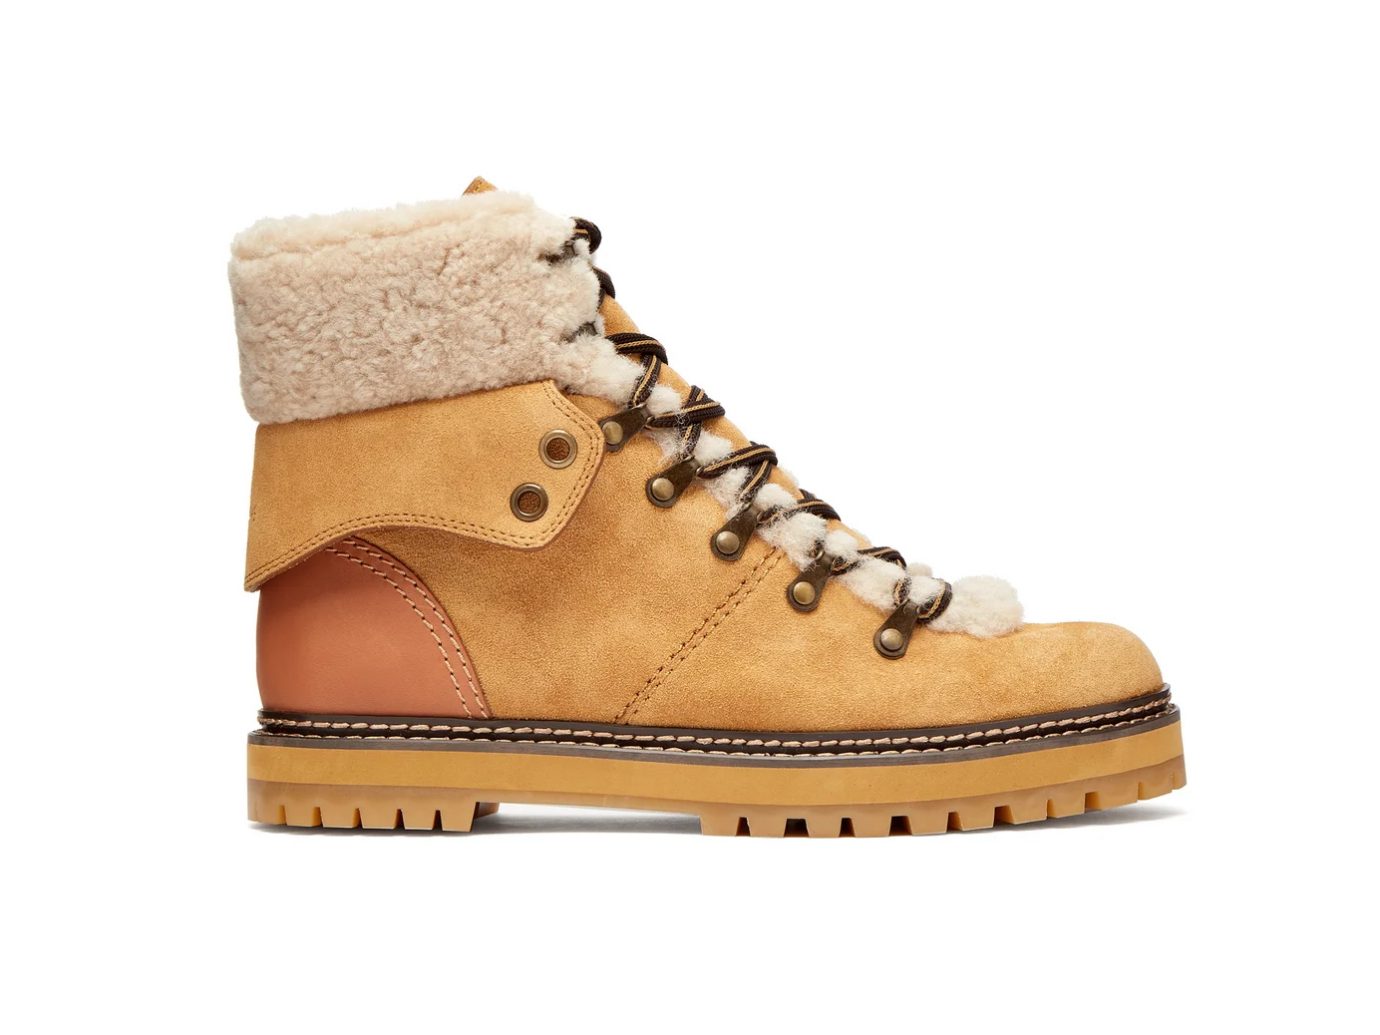 Women's Verona Lace-Up Insulated Winter Snow Boot